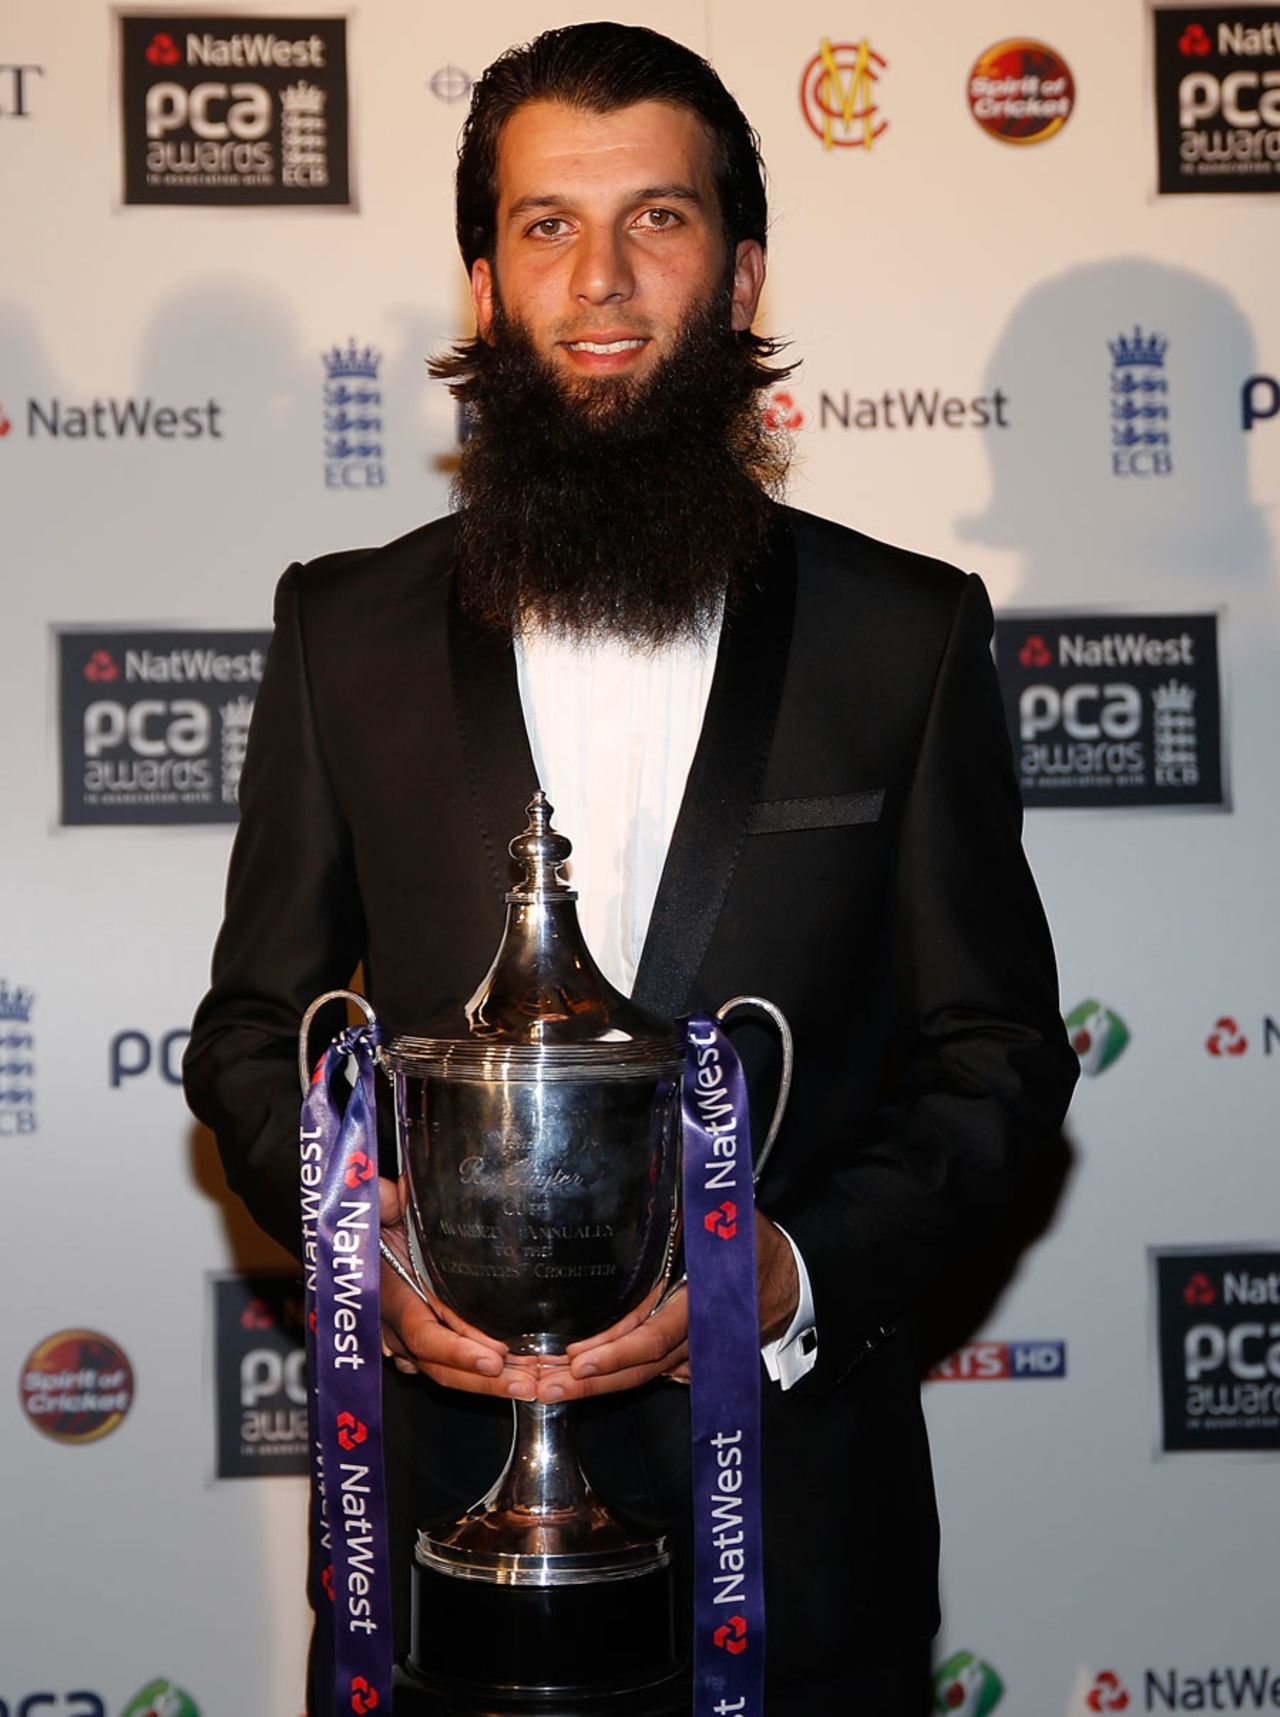 Moeen Ali received the PCA Player of the Year award, London, October 3, 2013